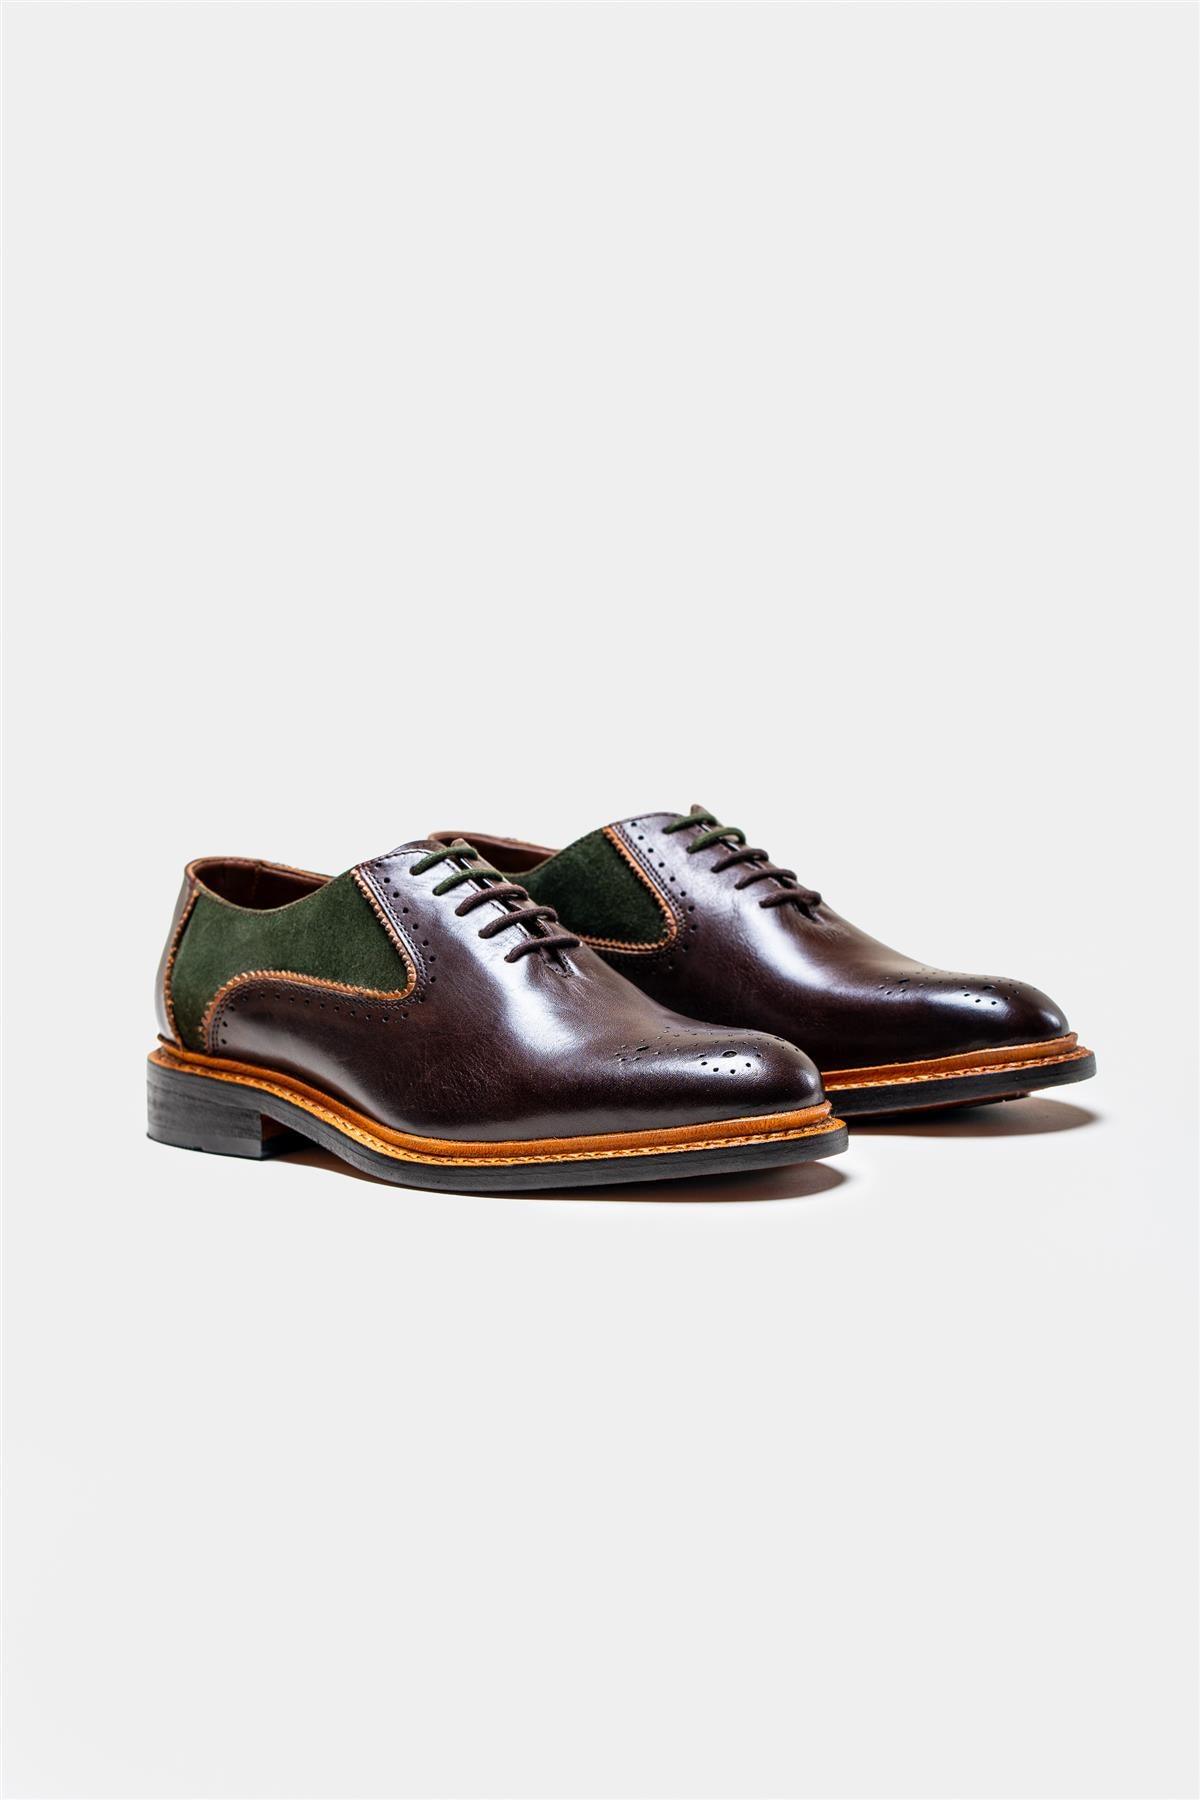 Brentwood brown/oilve shoes front